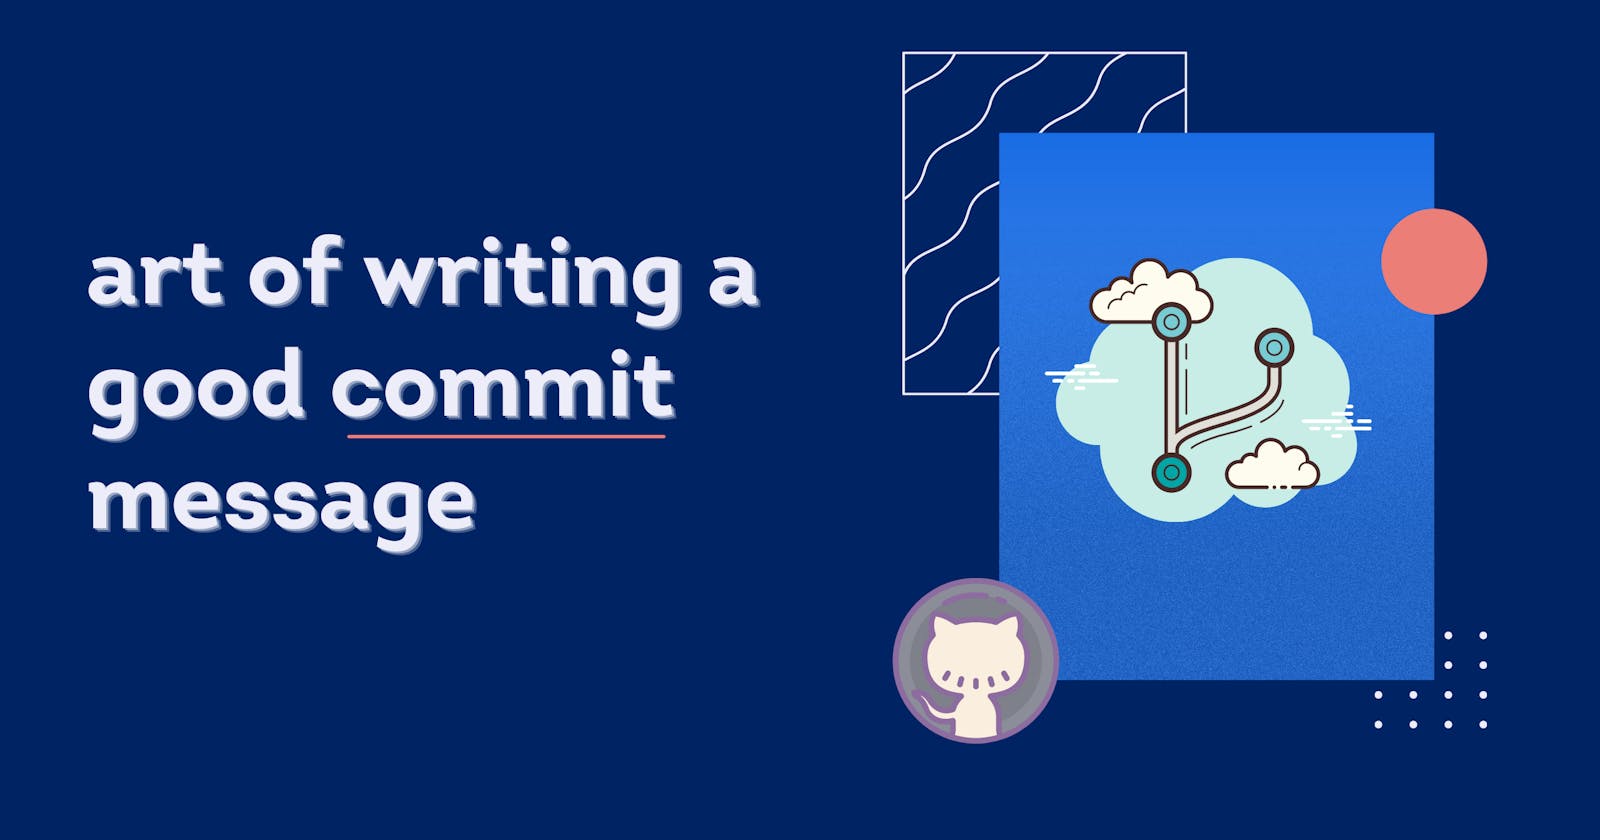 art of writing a good commit message